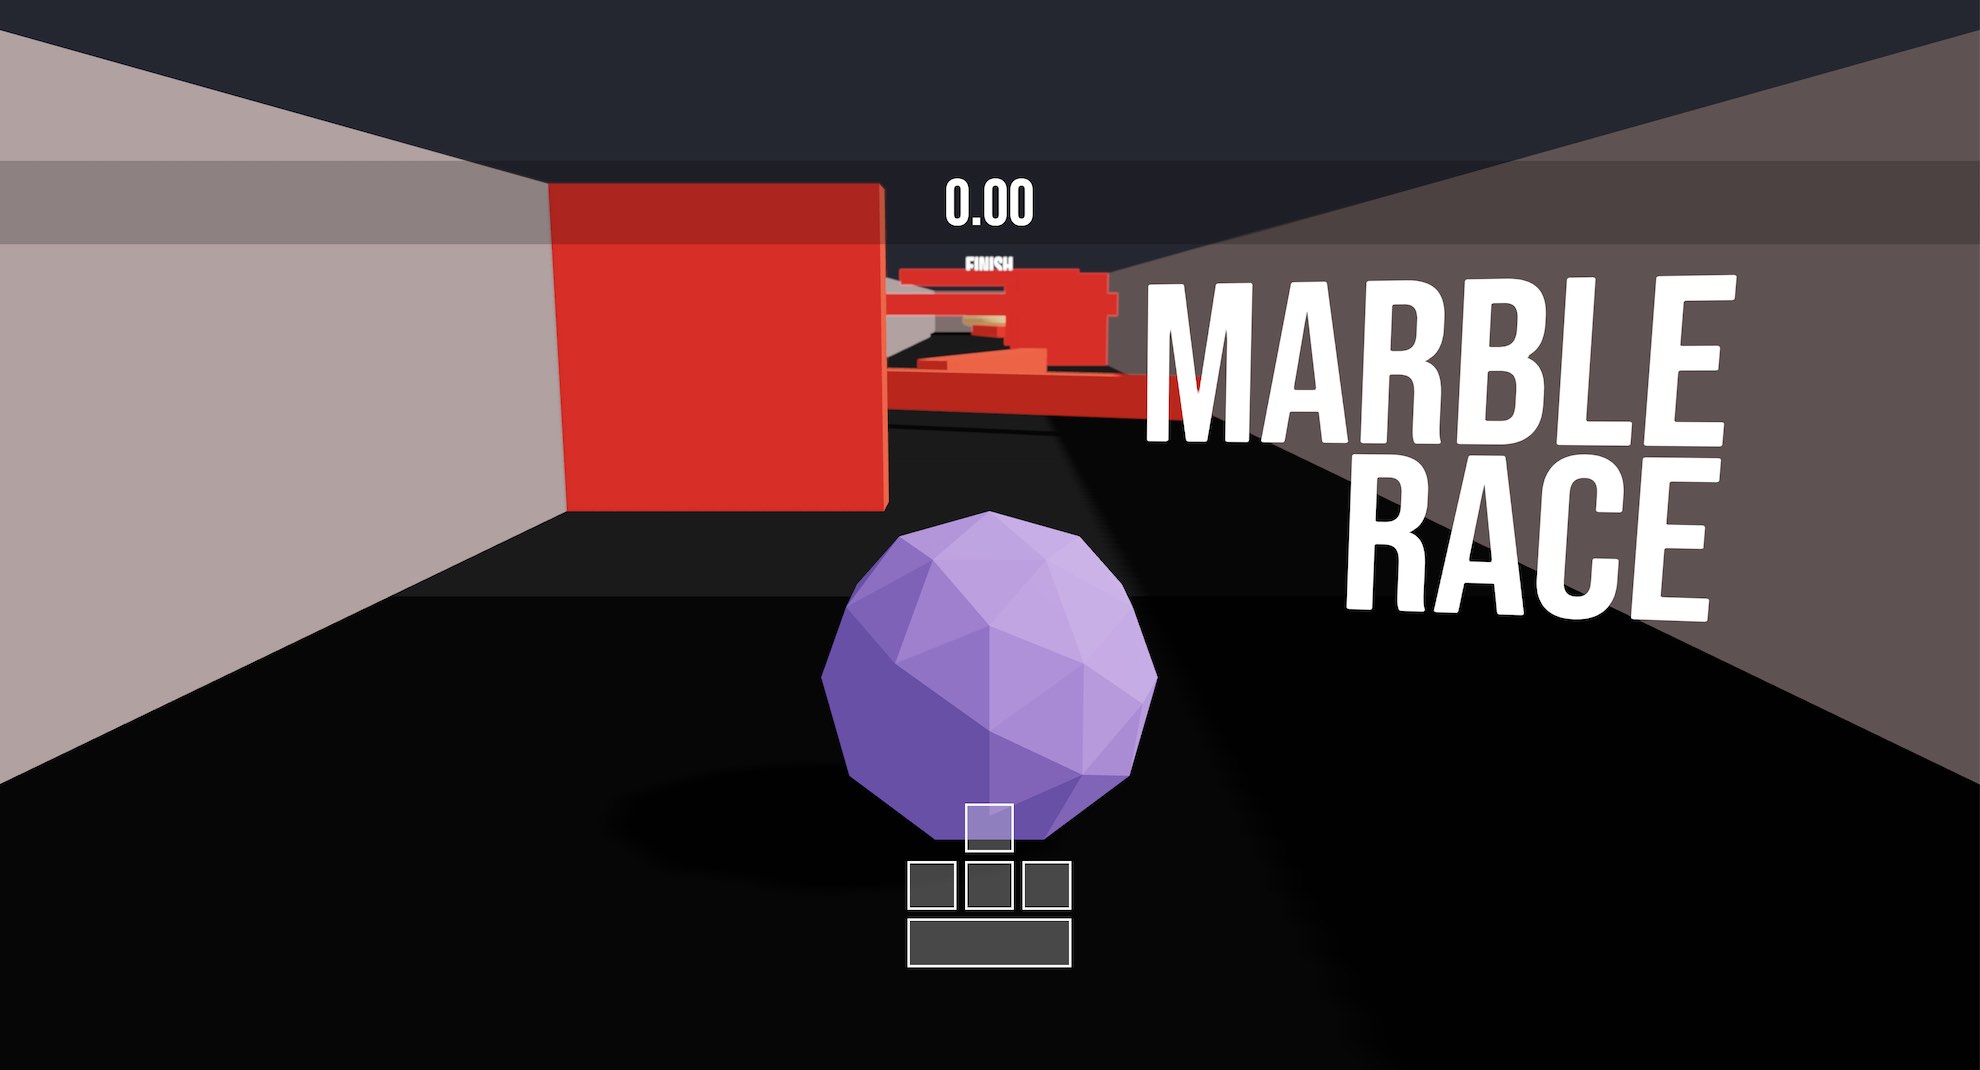 A purple marble sits at the beginning of a race track filled with moving red obstacles. The words "Marble Race" appear beside the marble. There's an unstarted timer that appears above the marble and a simplistic display of arrow or WASD keys and a space bar below.